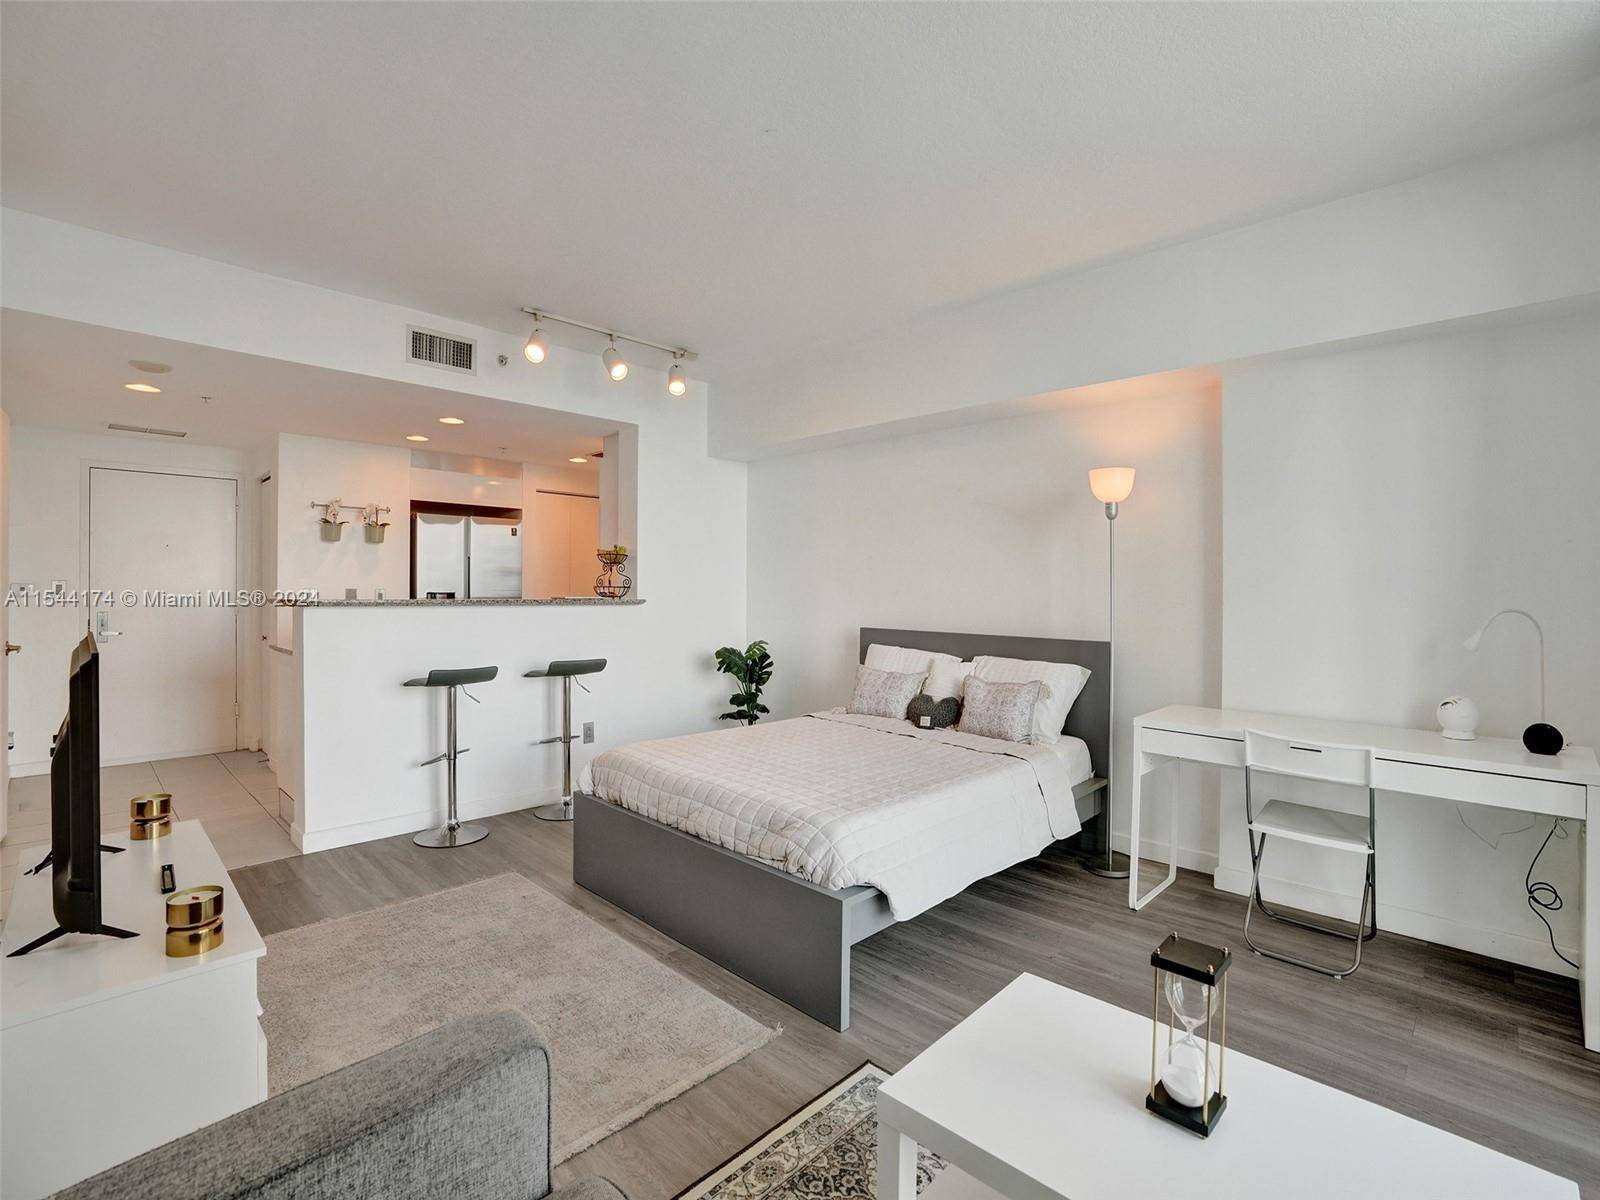 Experience the epitome of urban luxury living at this remodeled studio in the heart of Downtown Miami.